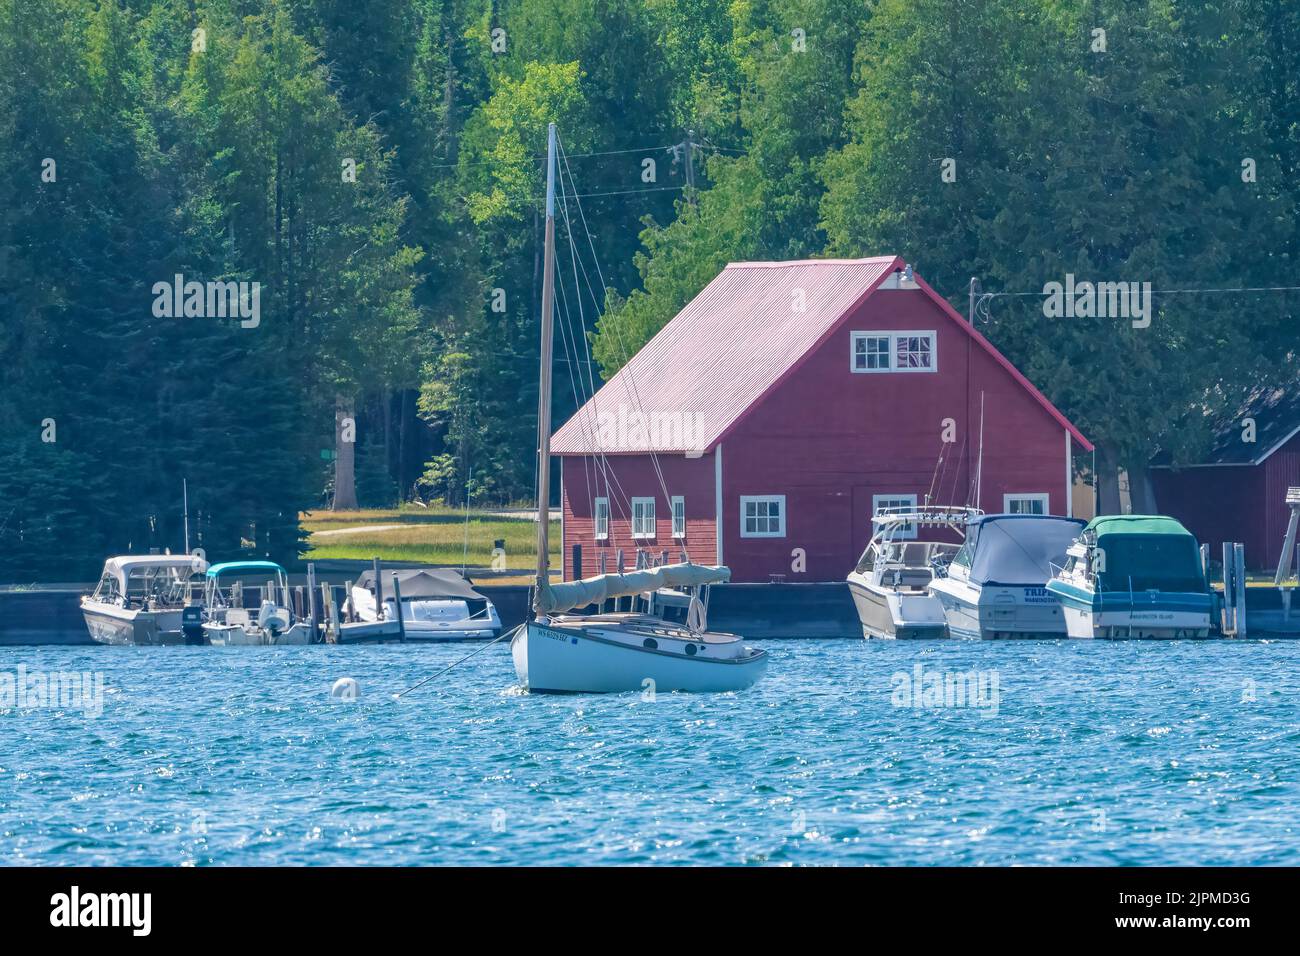 Washington Island, located at the northern tip of the Door County peninsula in NE Wisconsin, is a great sailing destination. Hera a boat is moored. Stock Photo